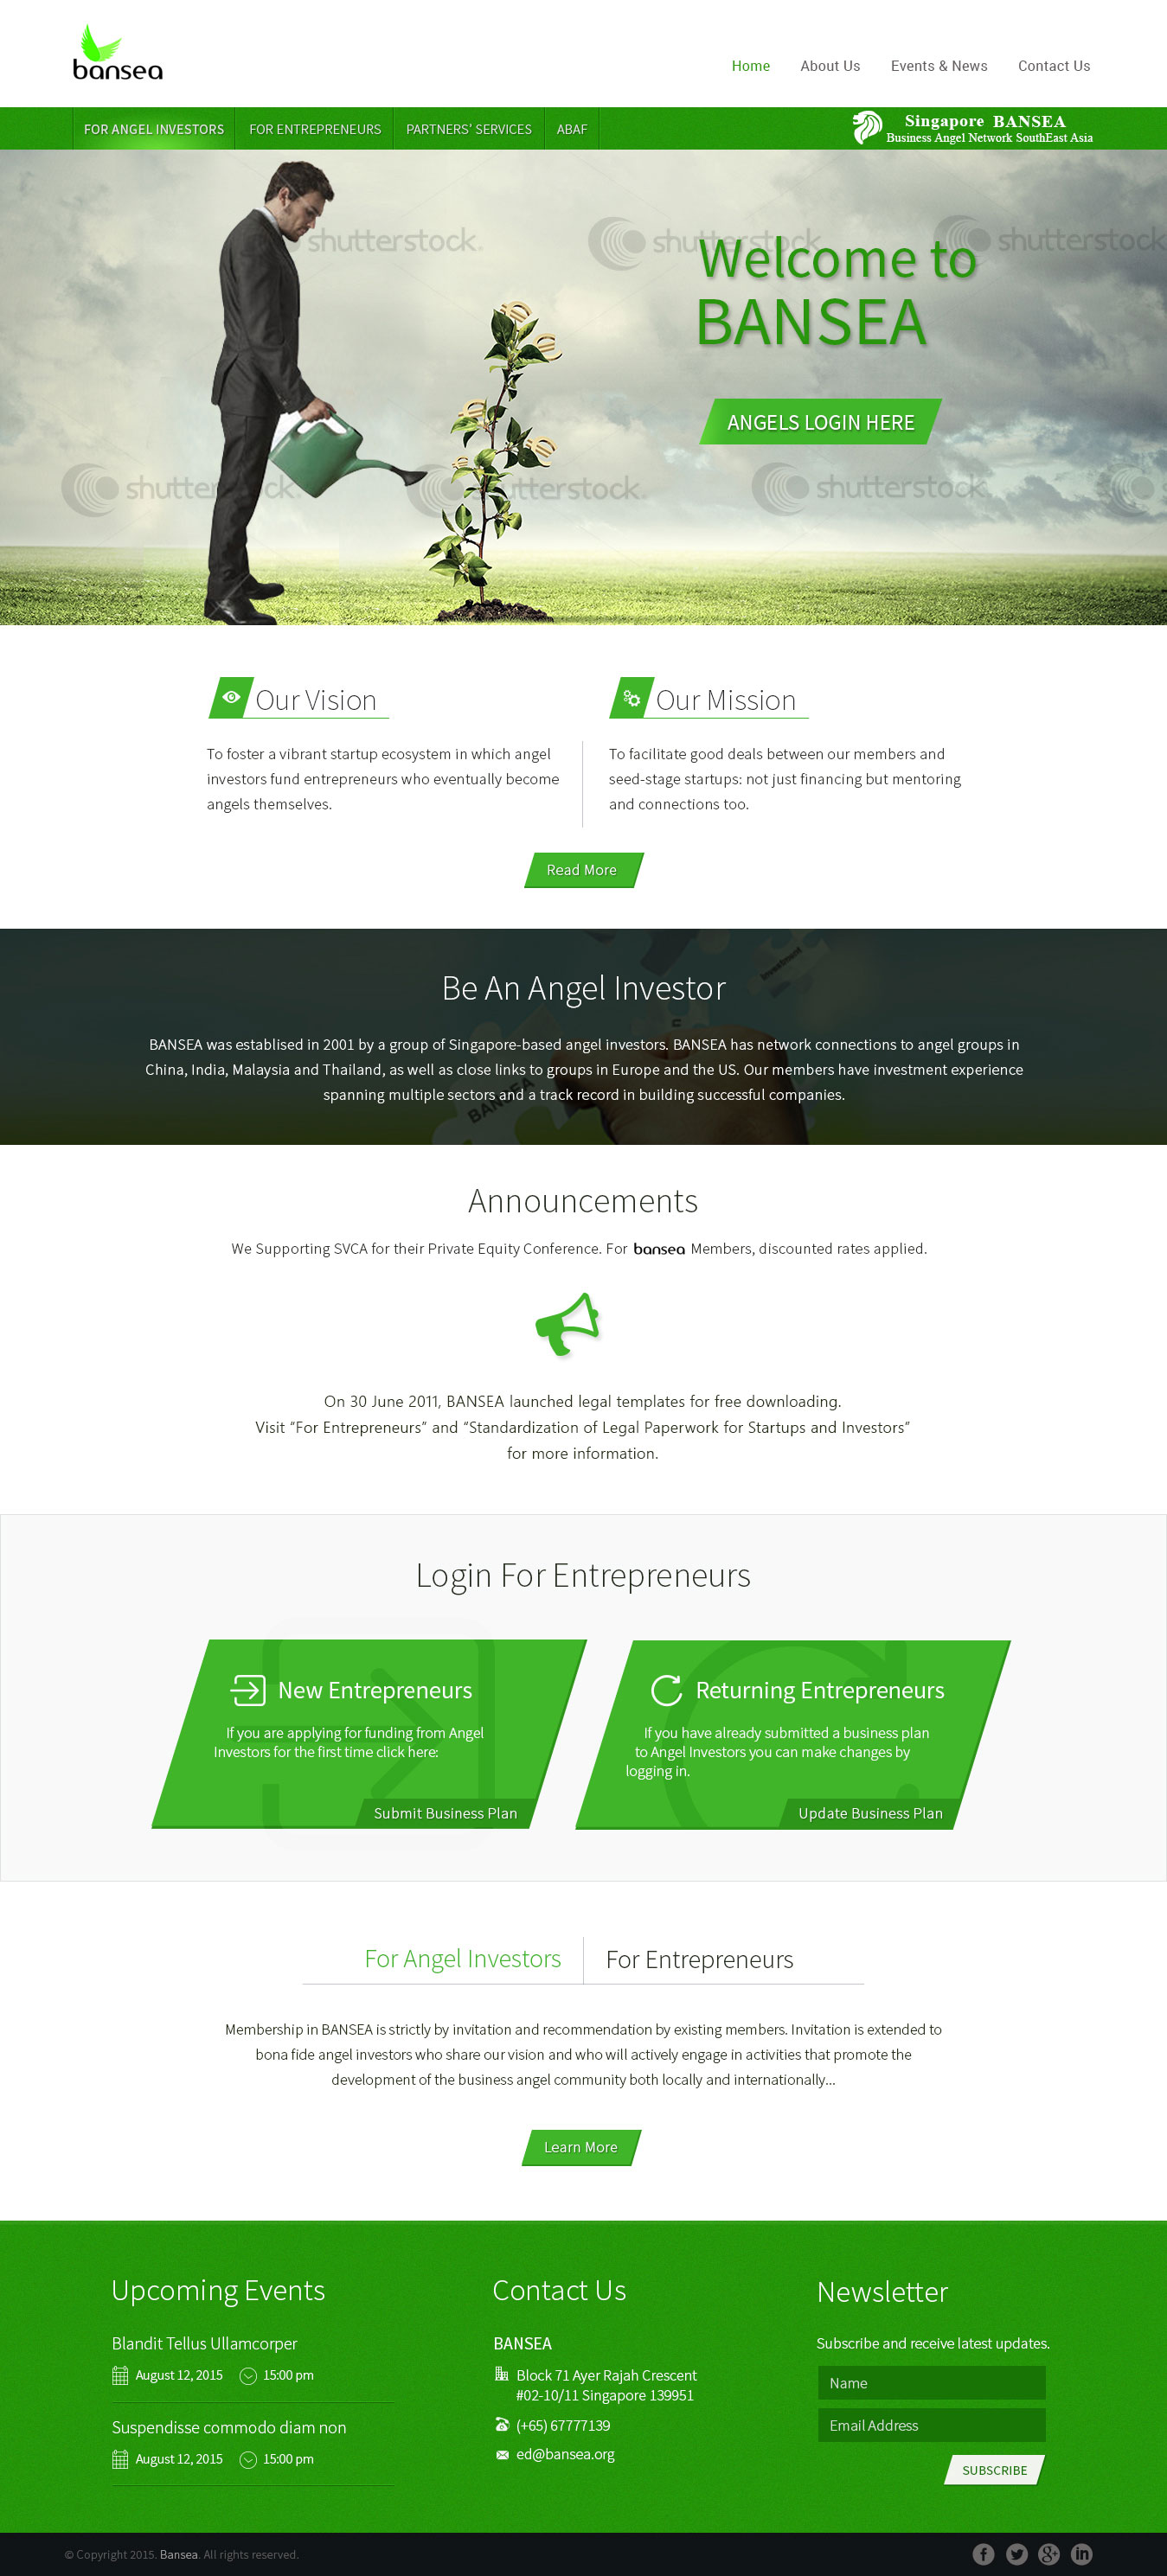 WordPress CMS Website for Angel Investment Company